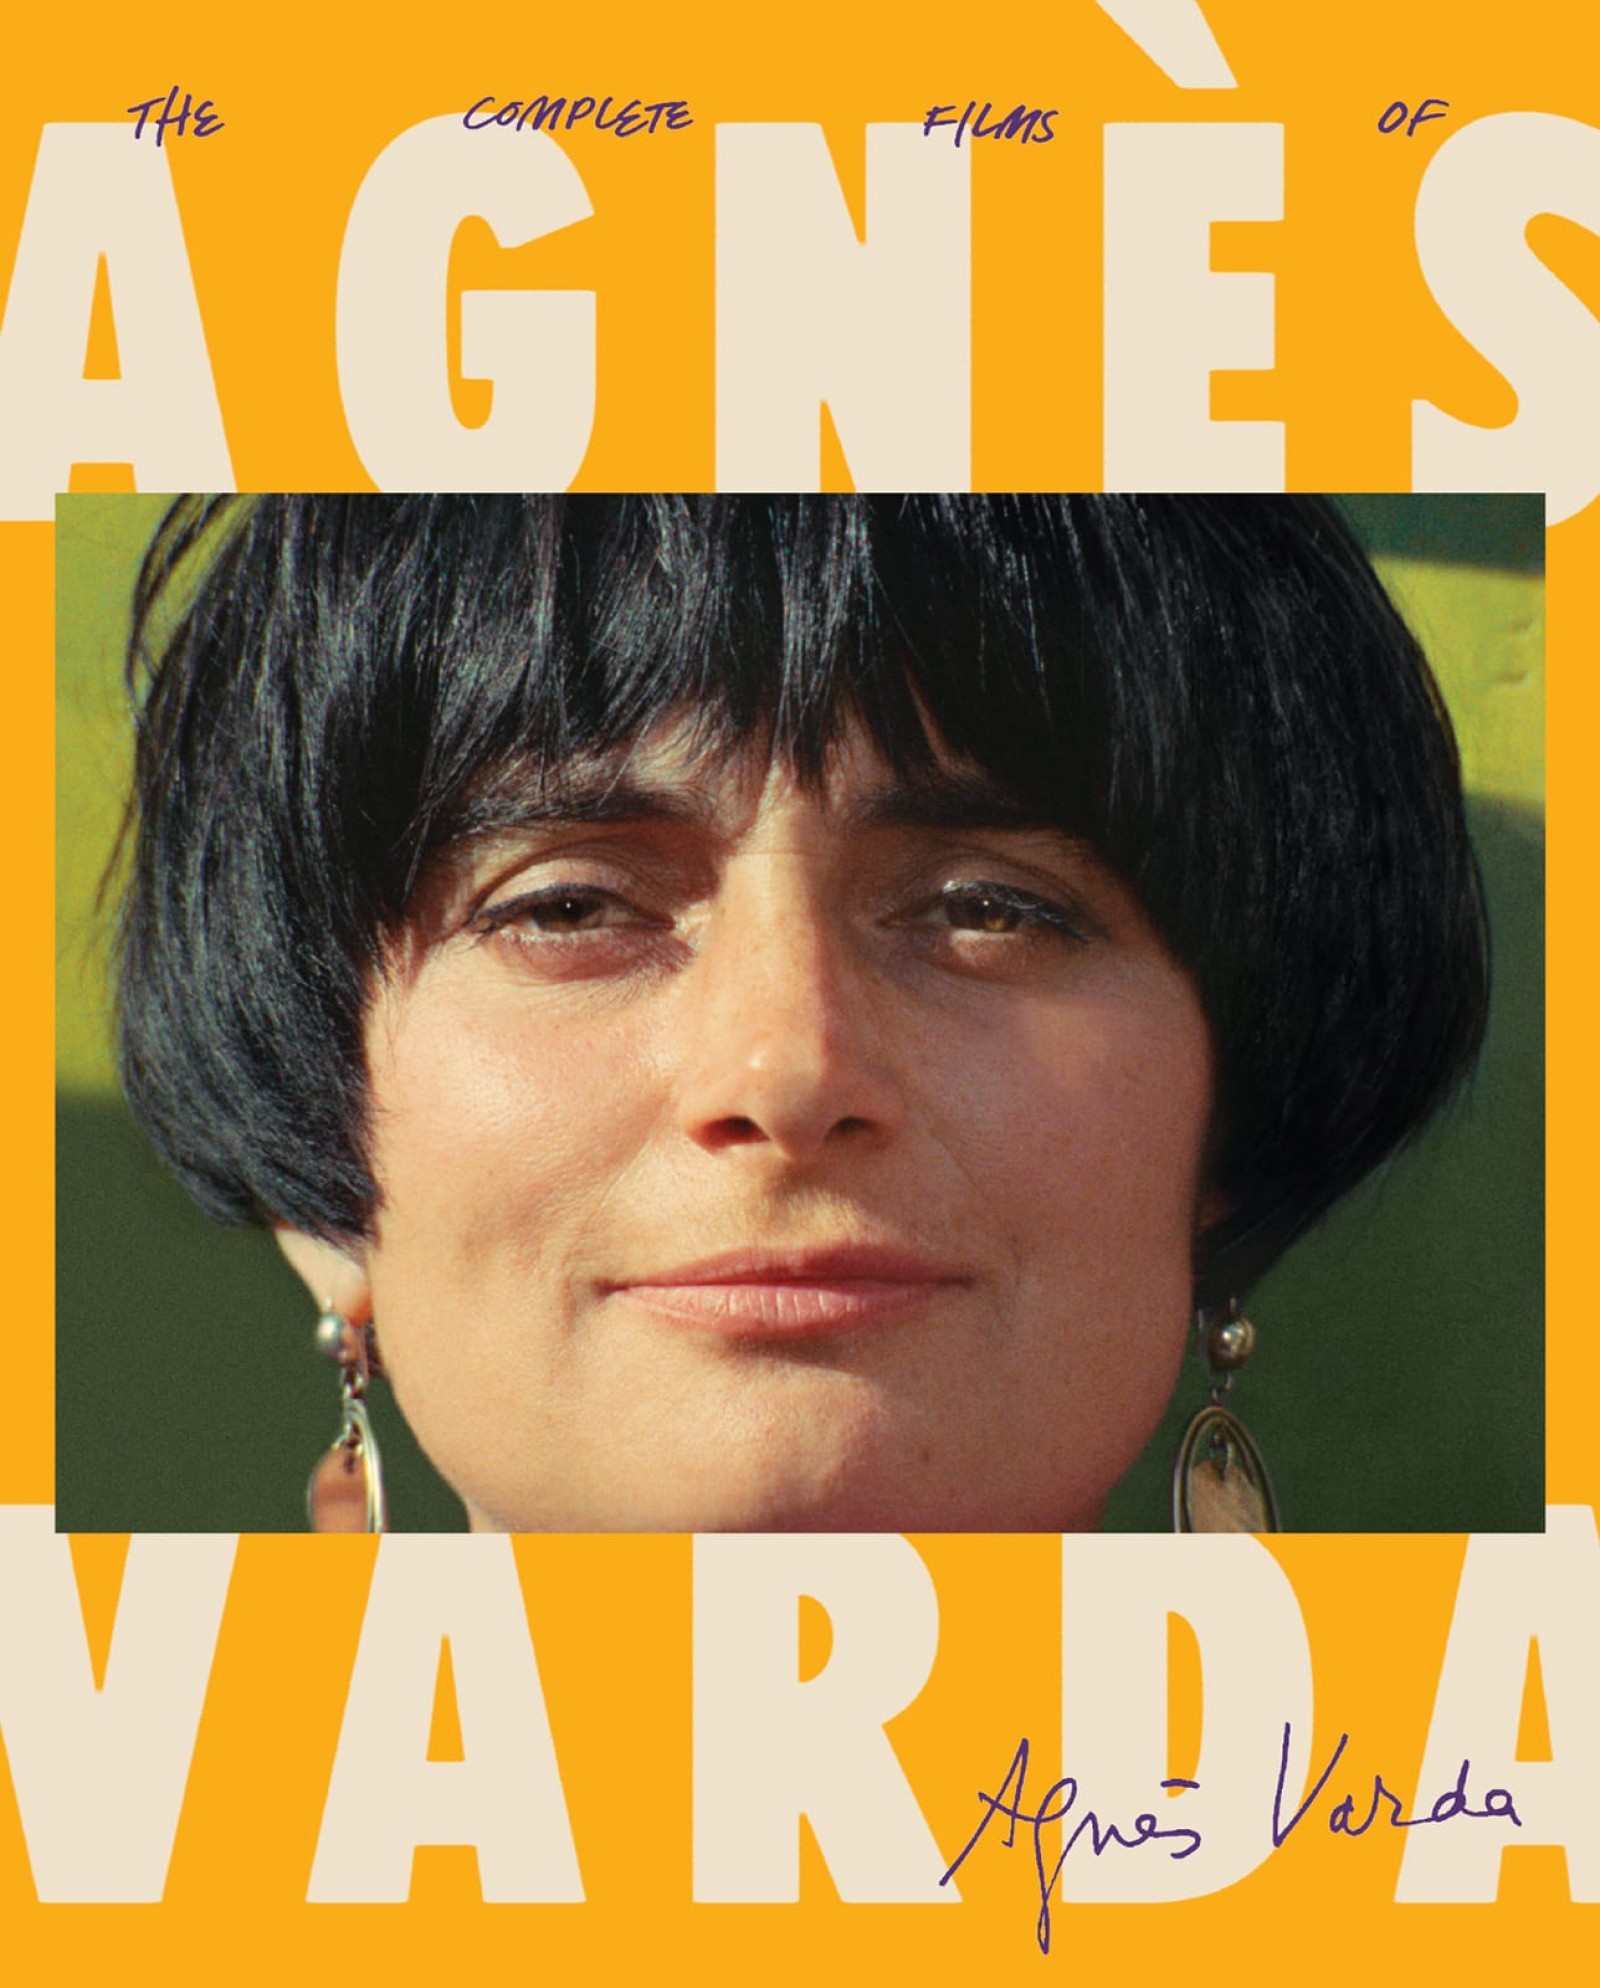 The Complete Films of Agn?s Varda